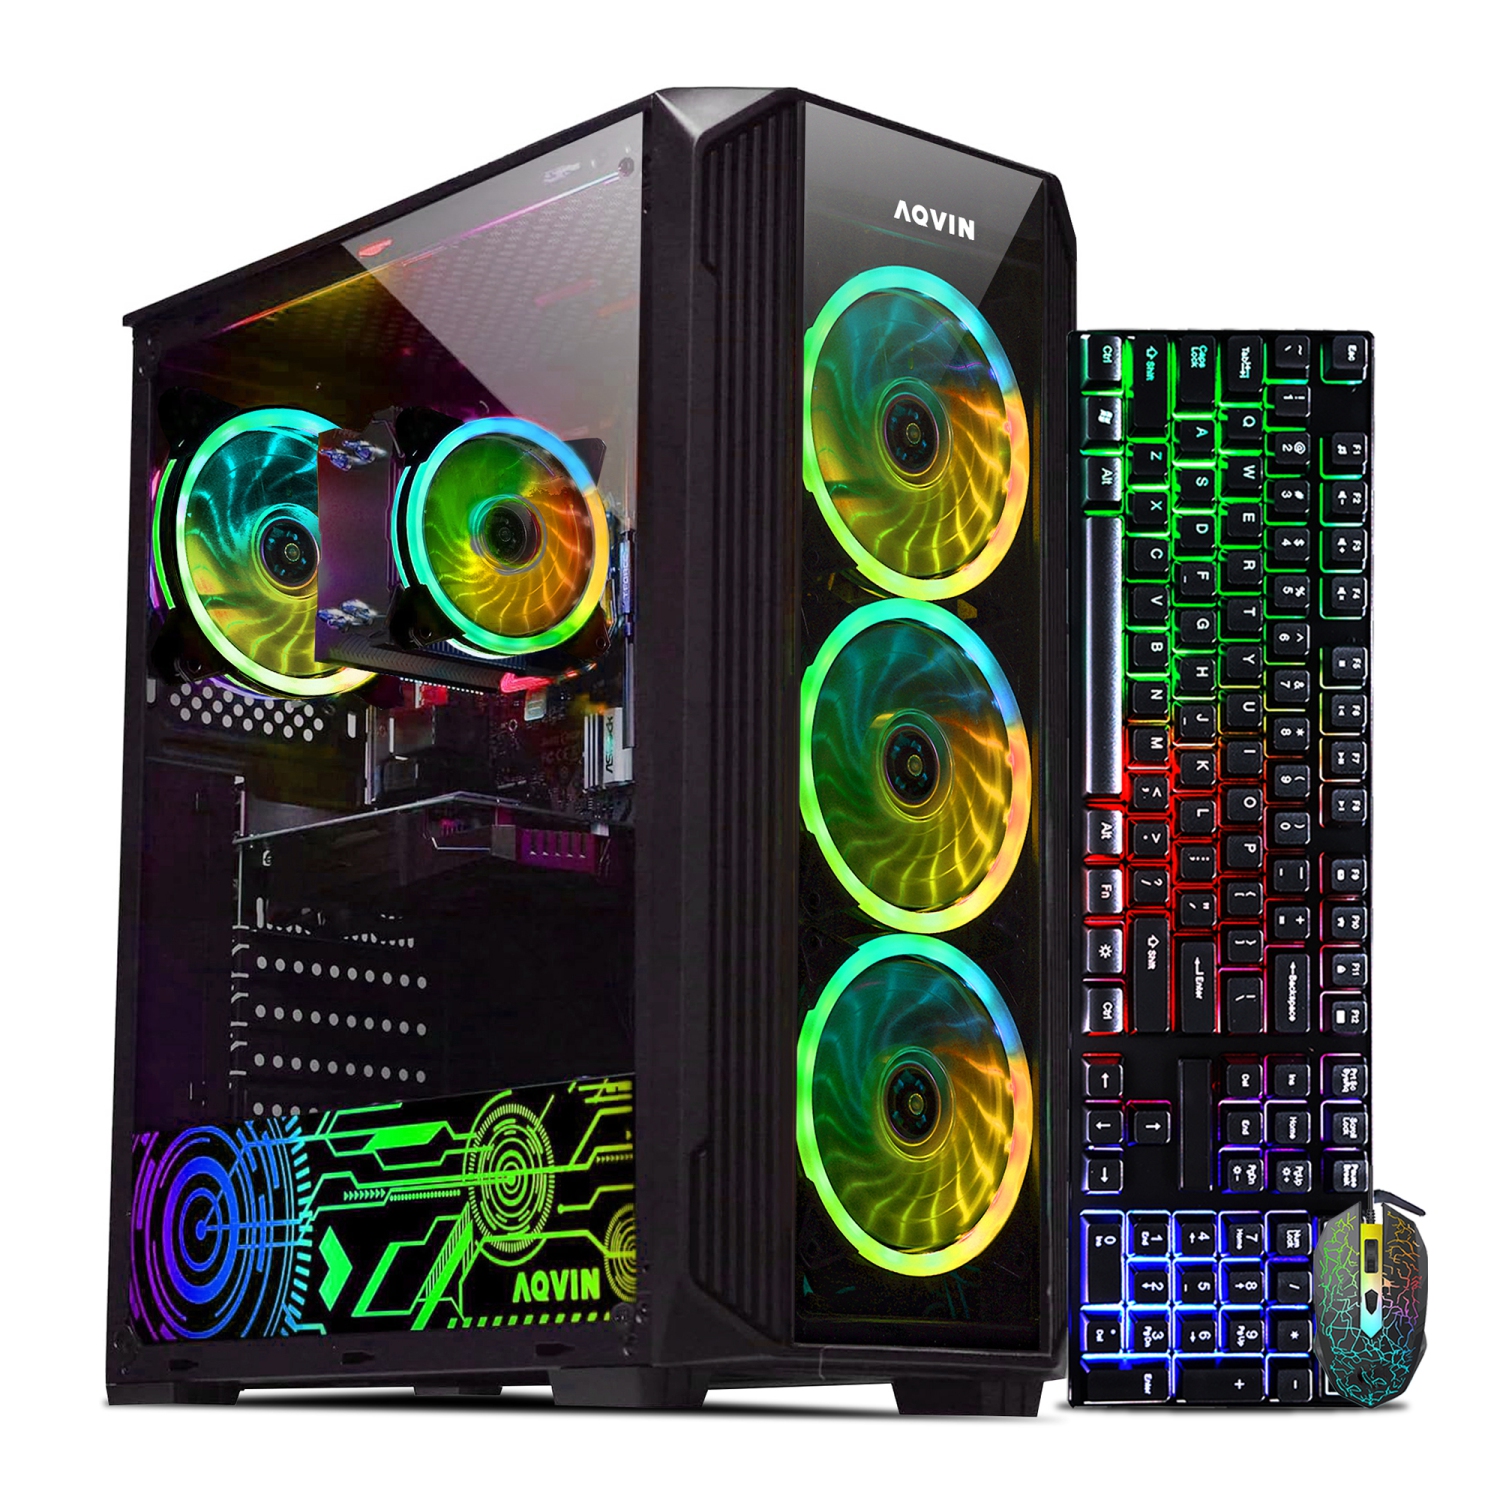 Refurbished (Excellent) Gaming PC Desktop AQVIN Intel Quad Core i7 upto 4.0GHz 32GB DDR4 RAM 512GB SSD AMD RX550 4GB DDR5 Graphics ~RGB Gaming Keyboard and Mouse Windows 10 WiFi